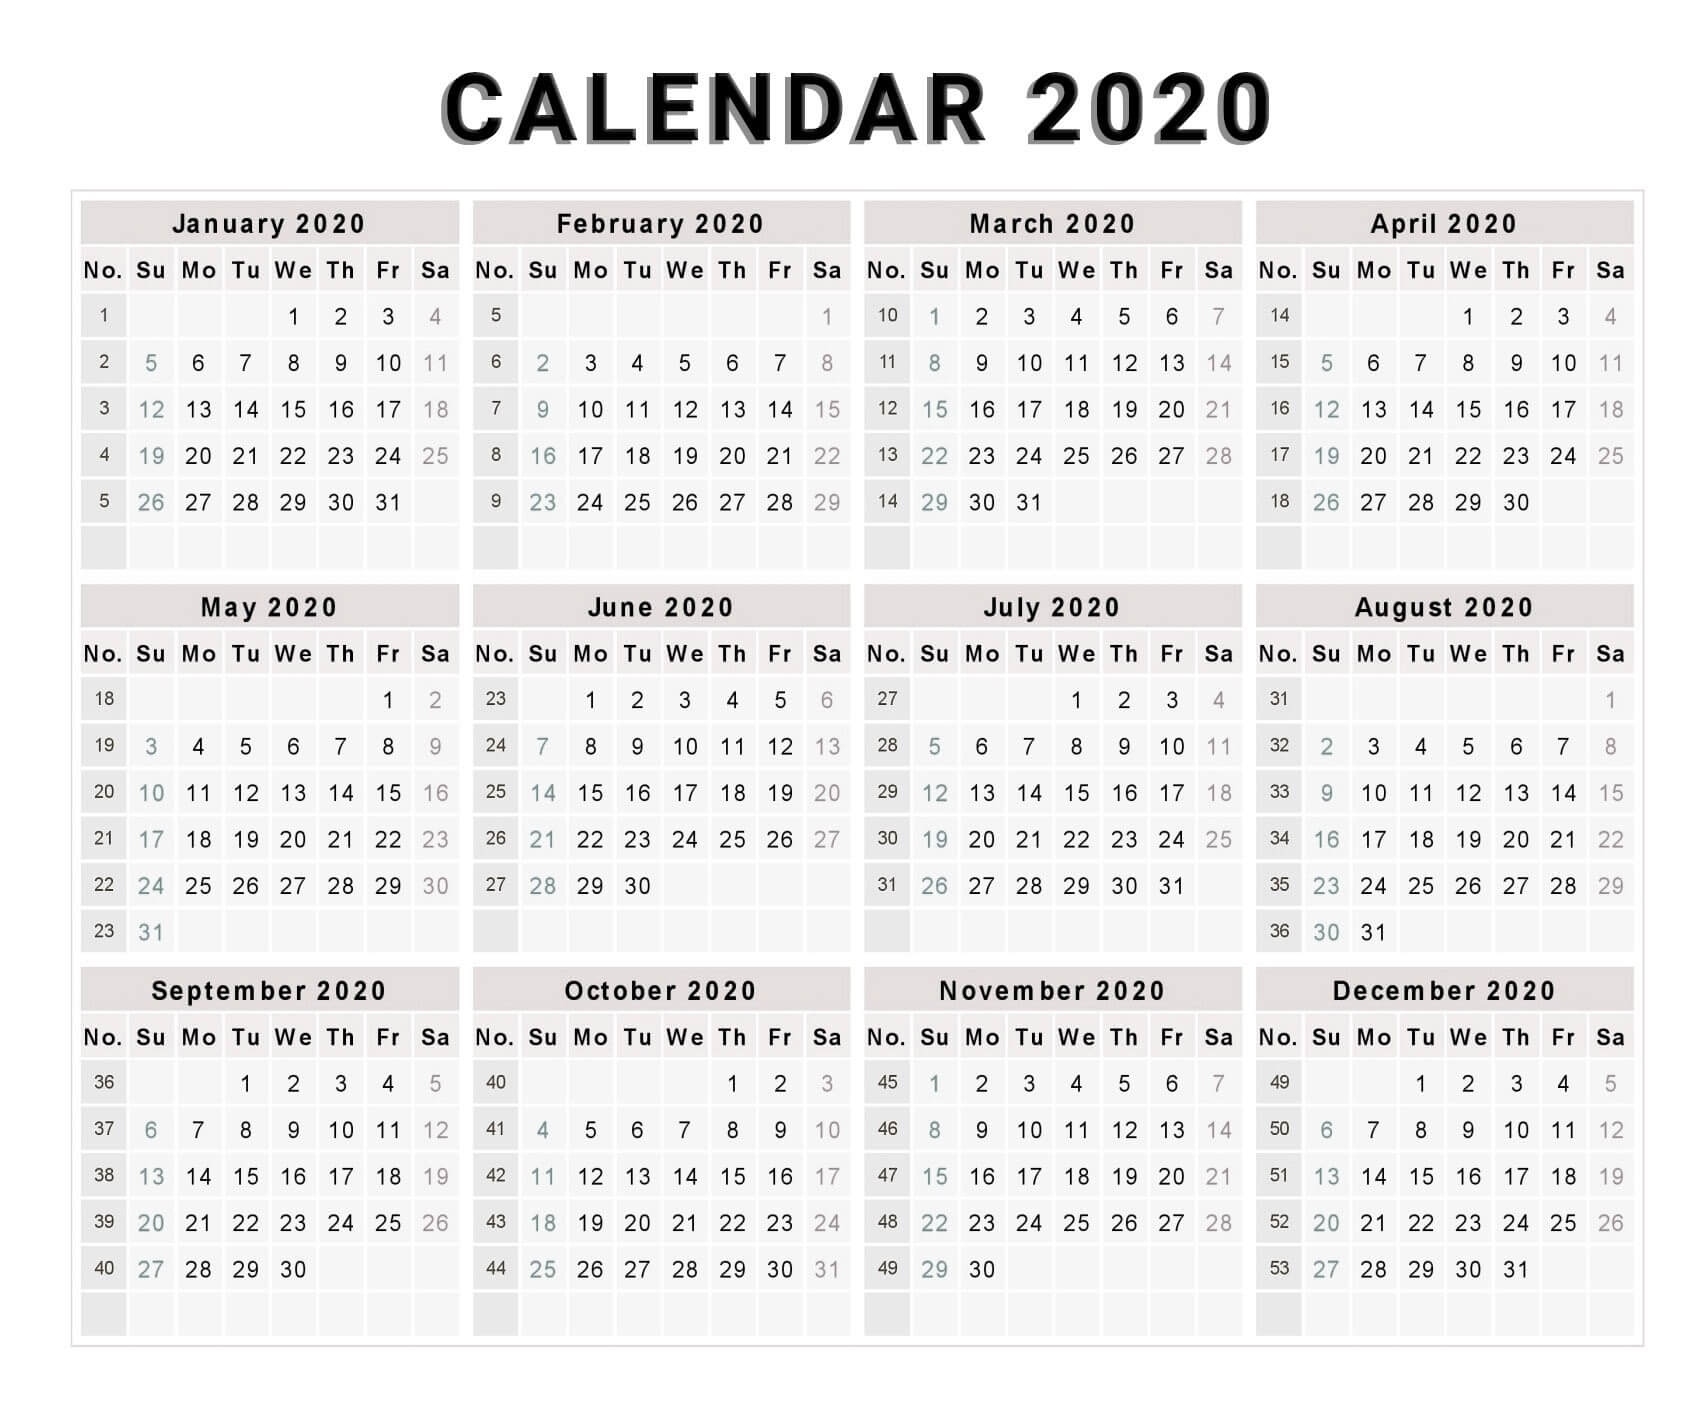 Yearly Calendar With Notes 2020 Pdf - 2019 Calendars For Exceptional Free Printable Calenders 2020 South Africa